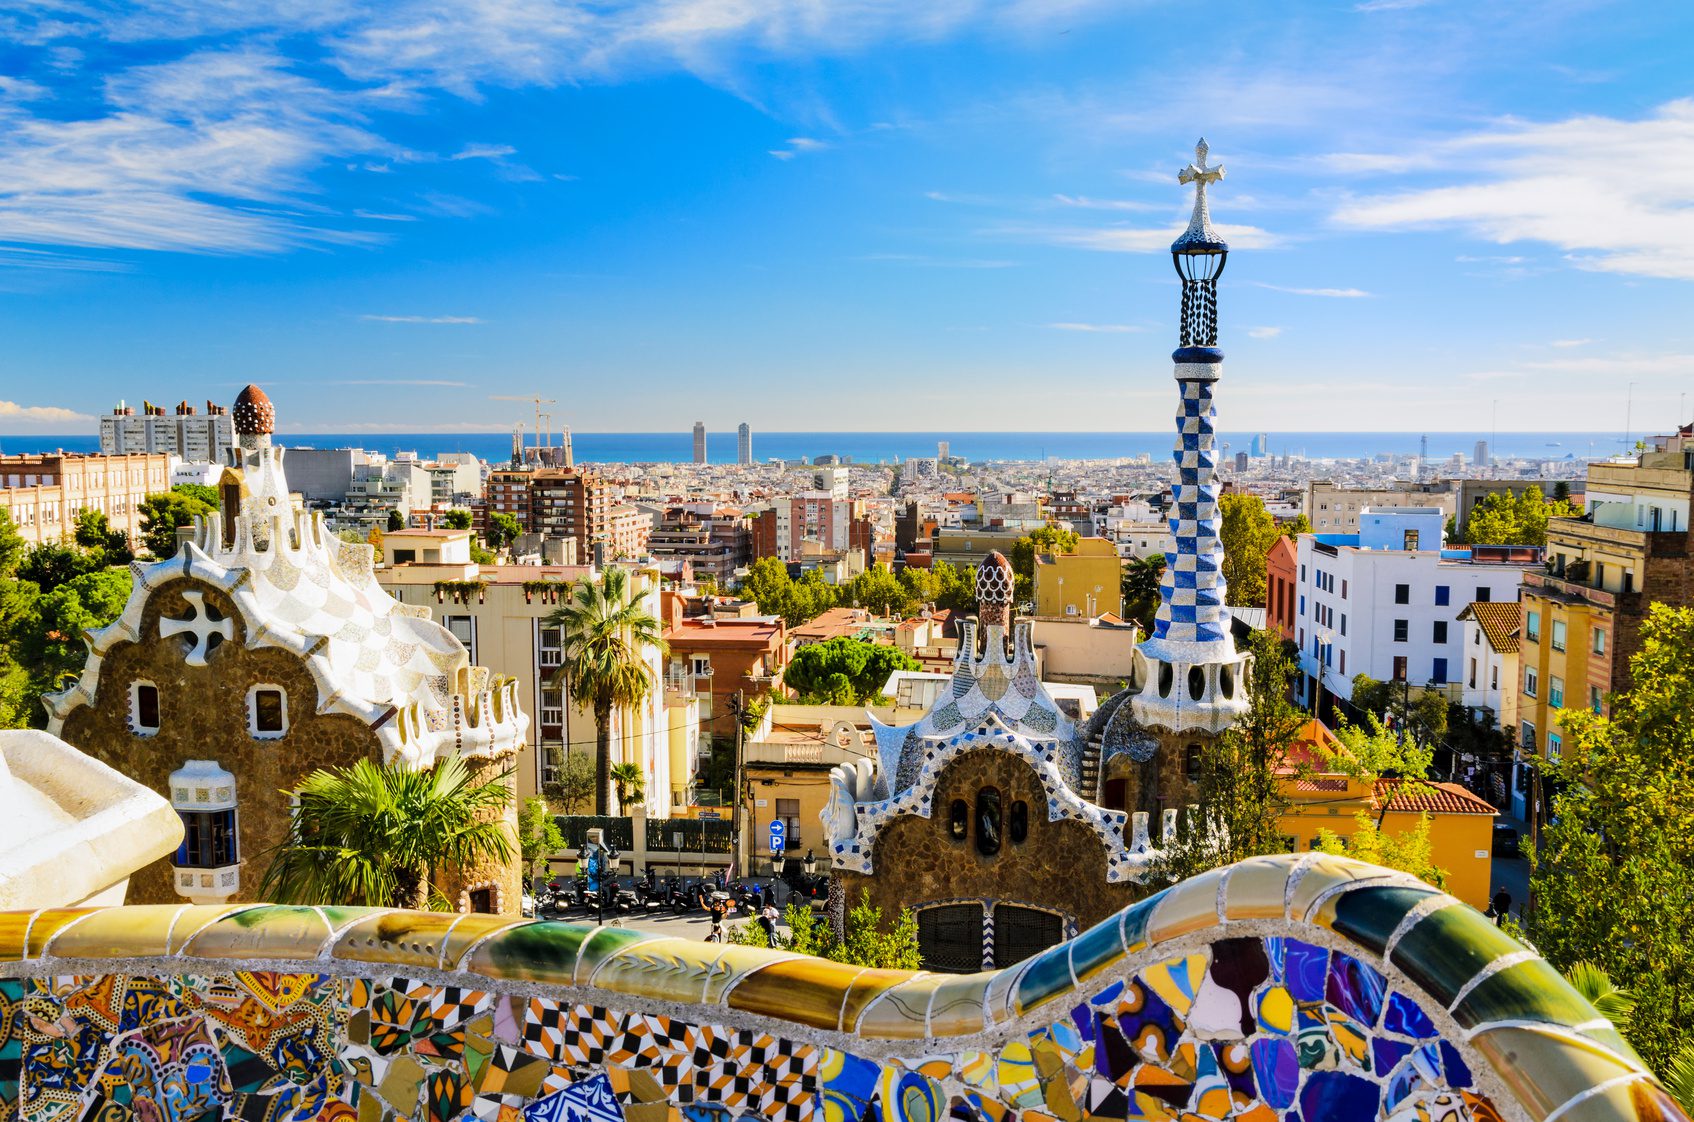 Park Guell in Barcelone, Spain